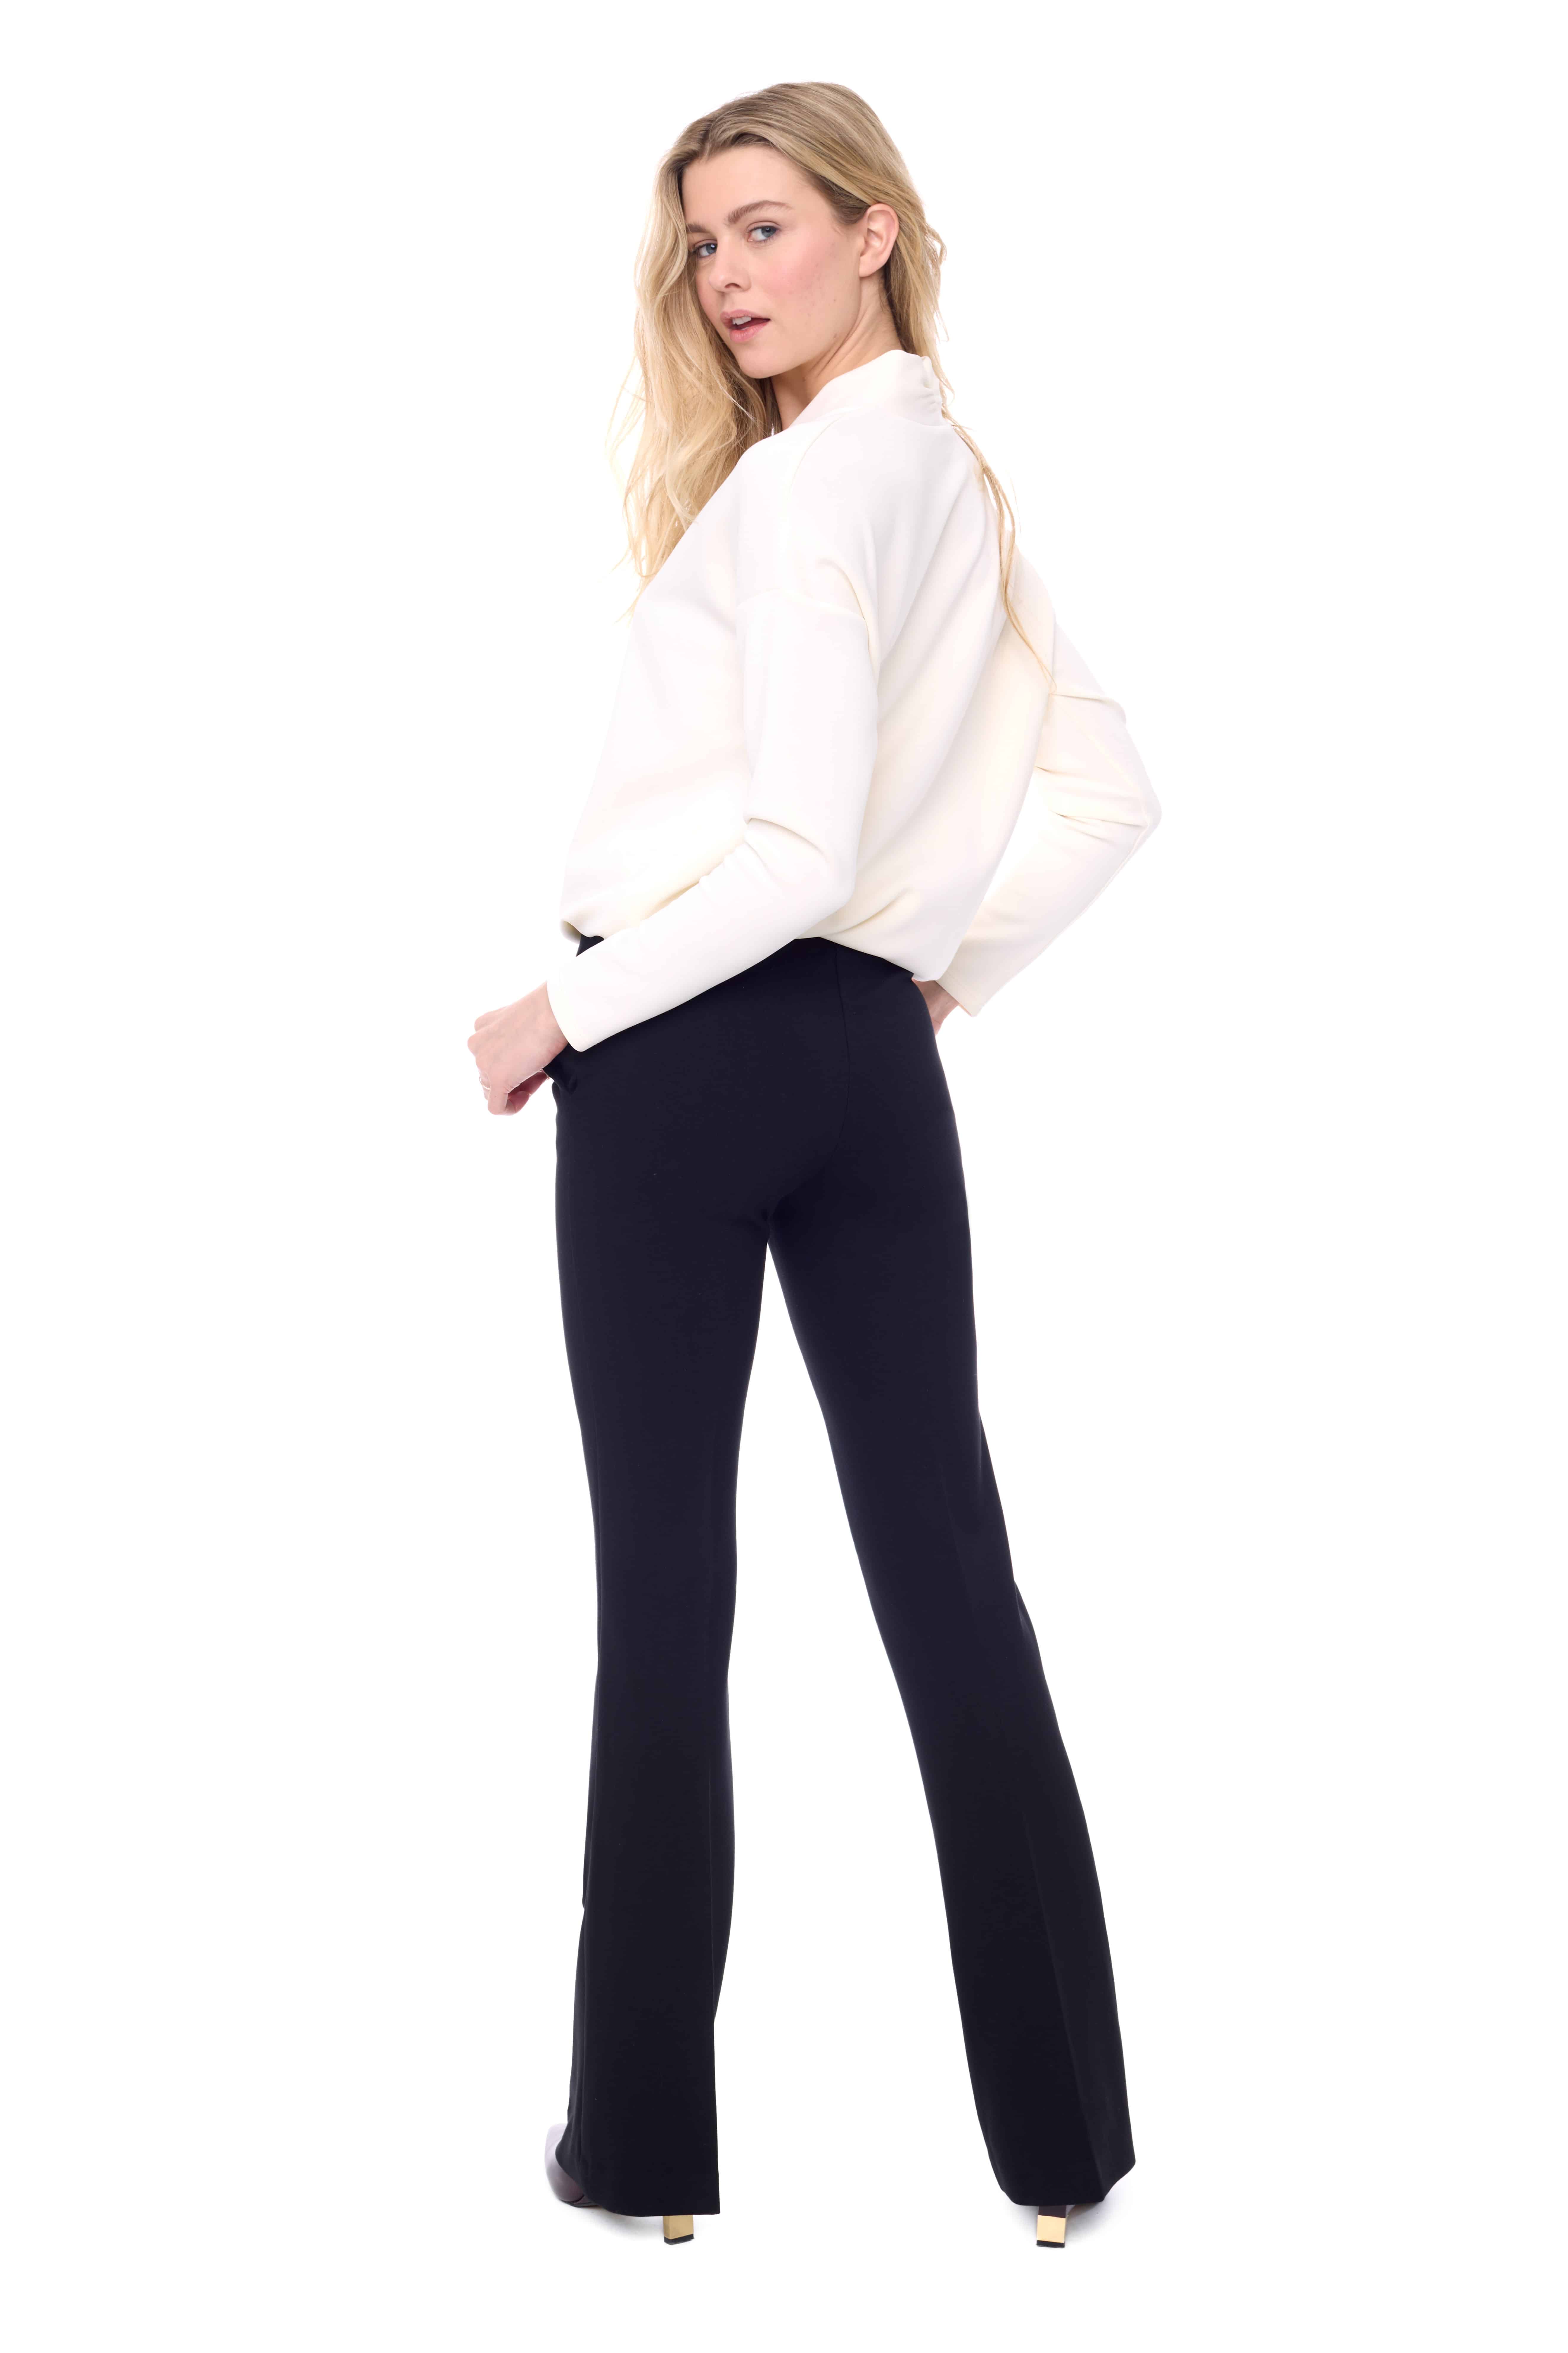 SOLID PONTE FULL-LENGTH BOOTCUT PANT - UP! Pants